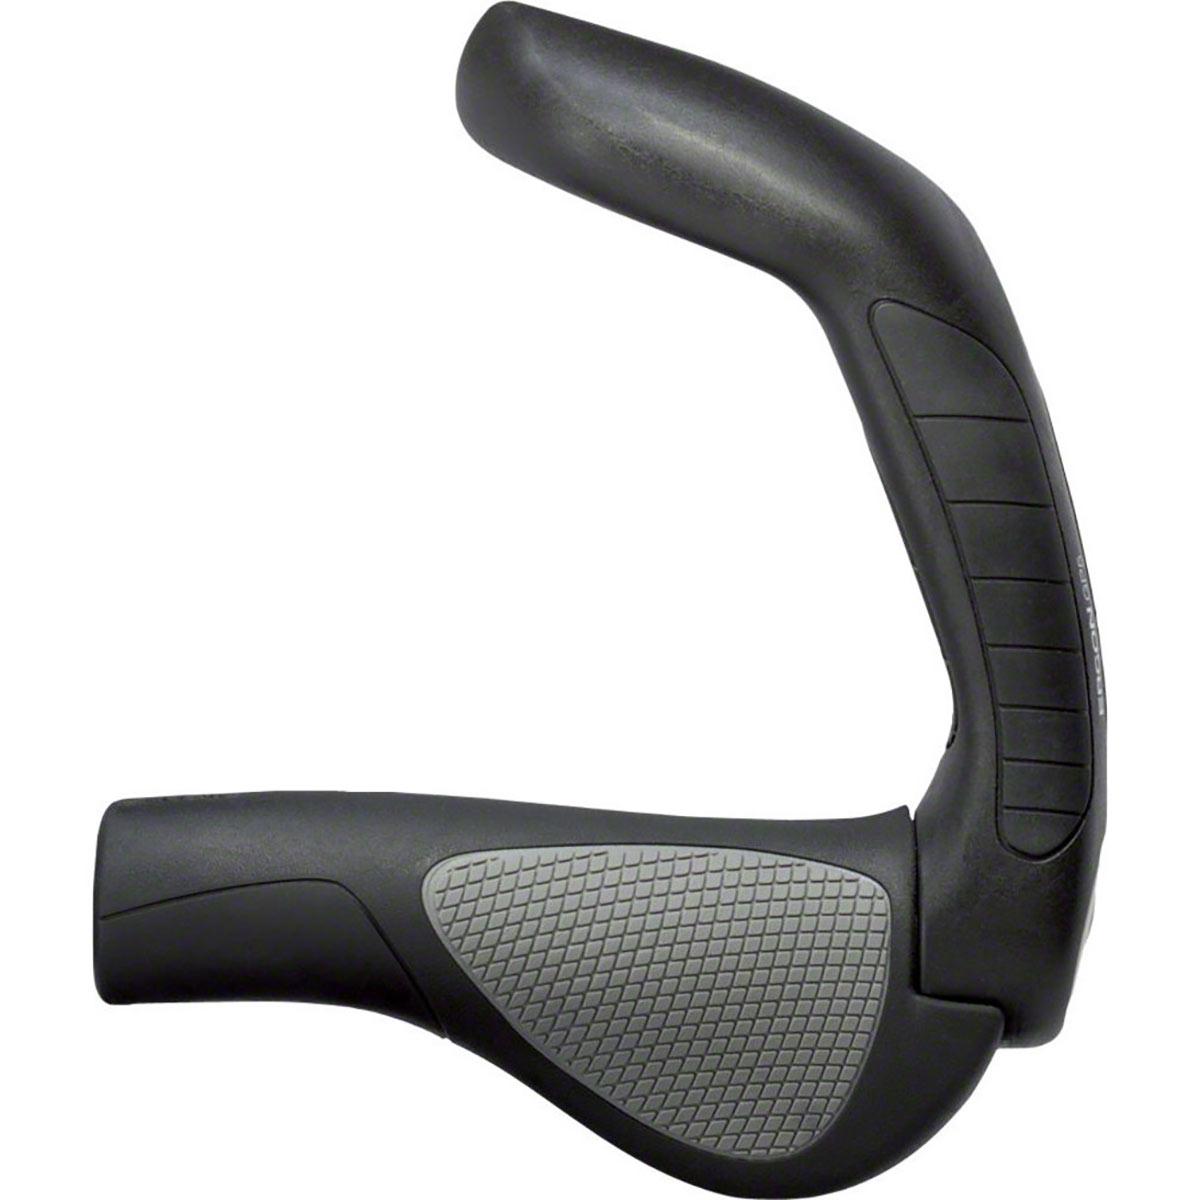  ESI Grips Racers Edge MTB Grip (Black), one Size (GVP03) :  Bike Grips And Accessories : Sports & Outdoors